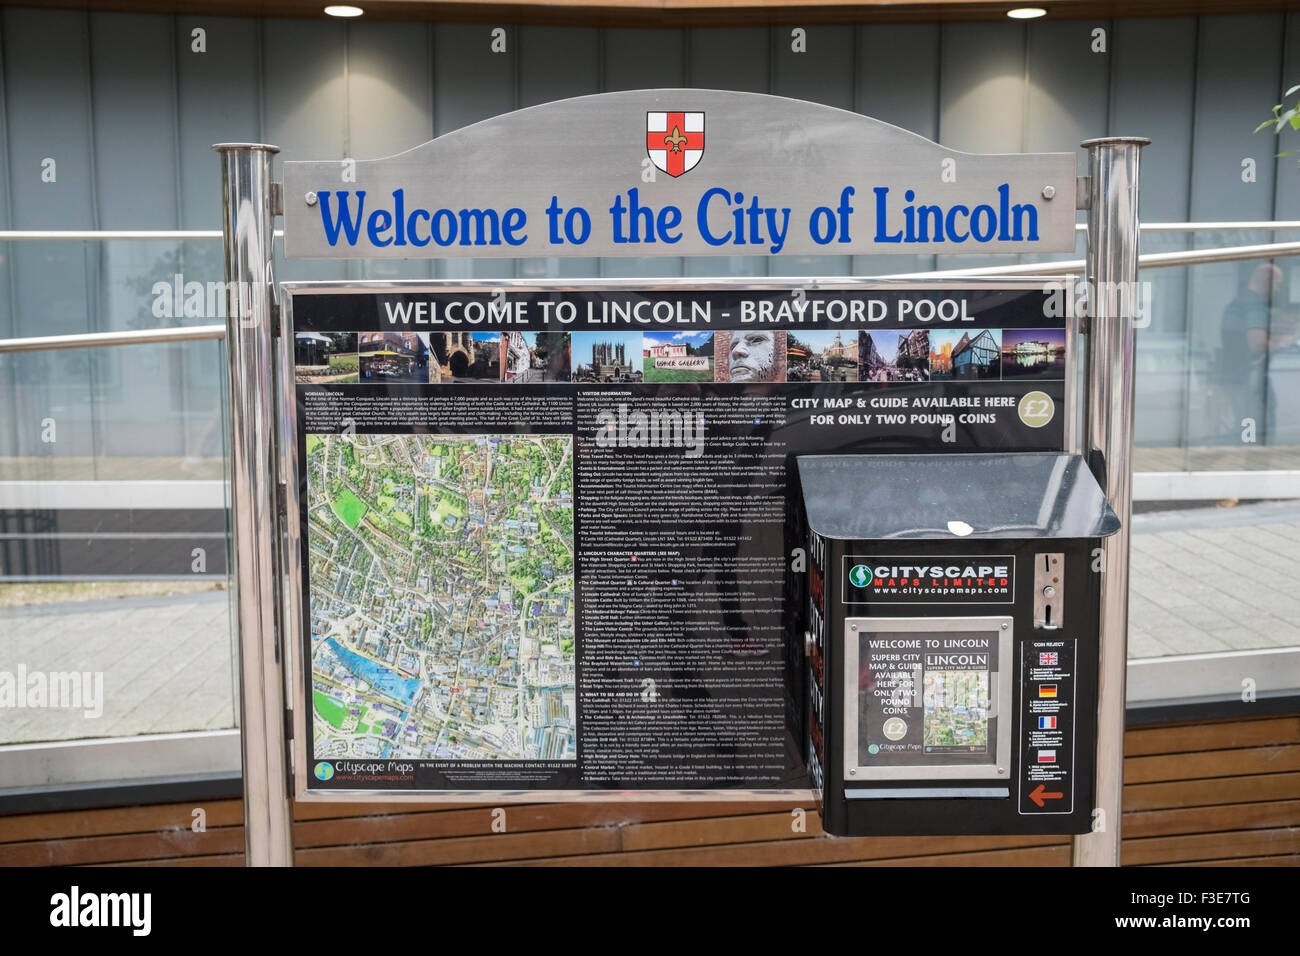 Tourist map machine for City of Lincoln, Brayford Pool, Lincoln, Lincolnshire, England UK Stock Photo